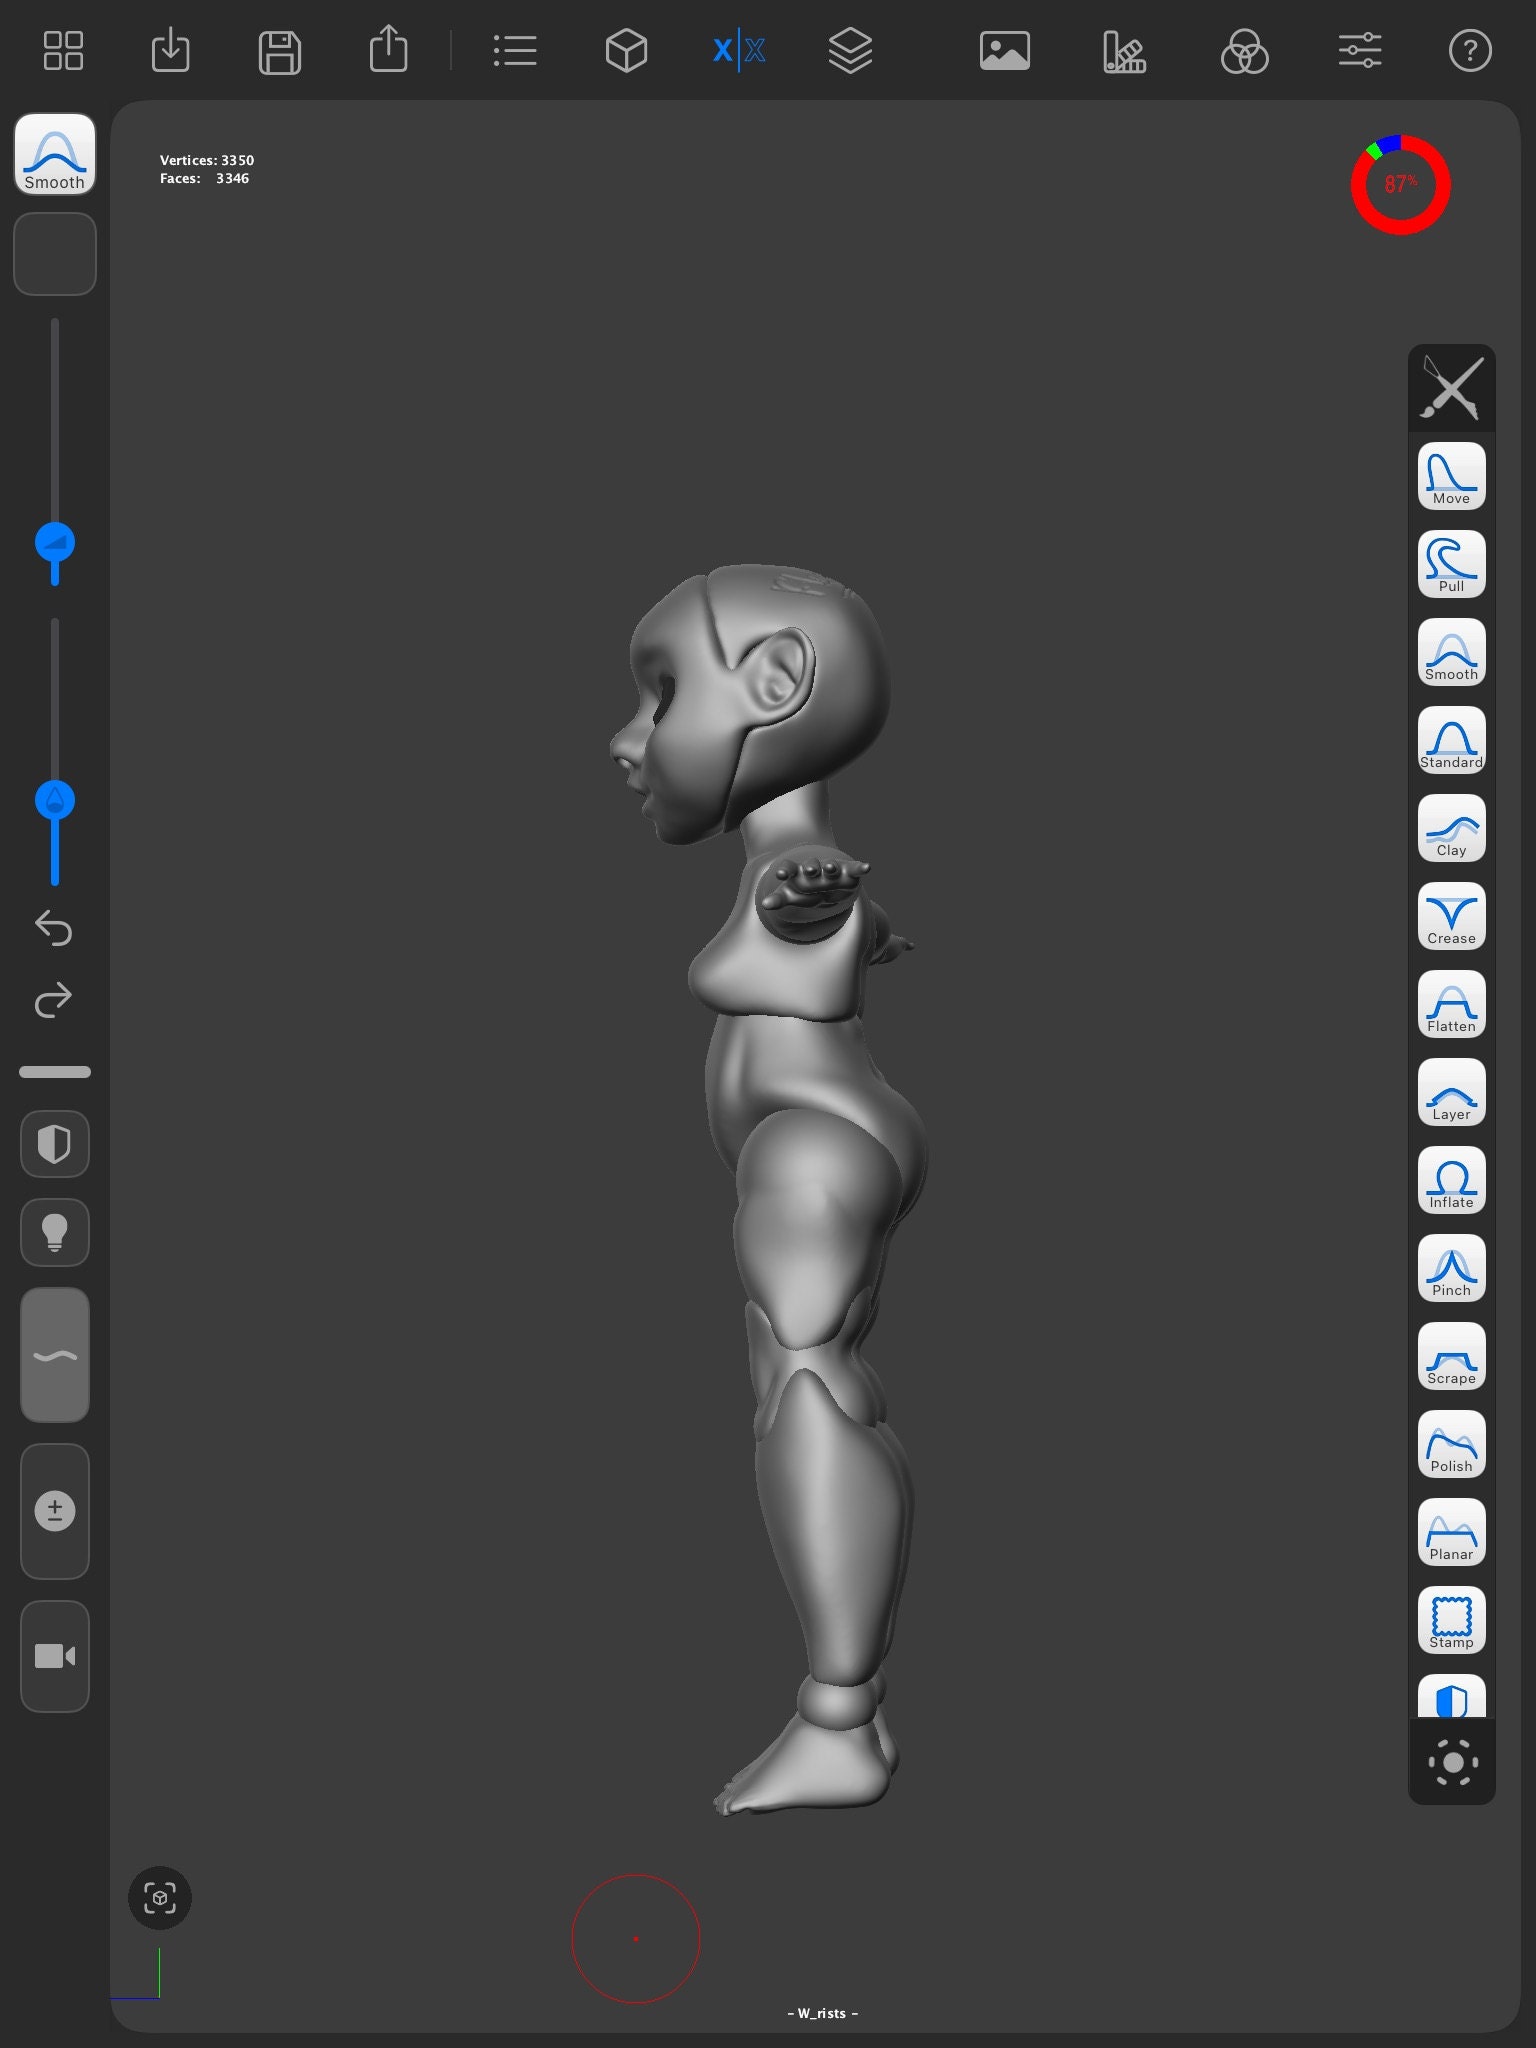 Image of a 3D modeled ball jointed doll in grayscale.